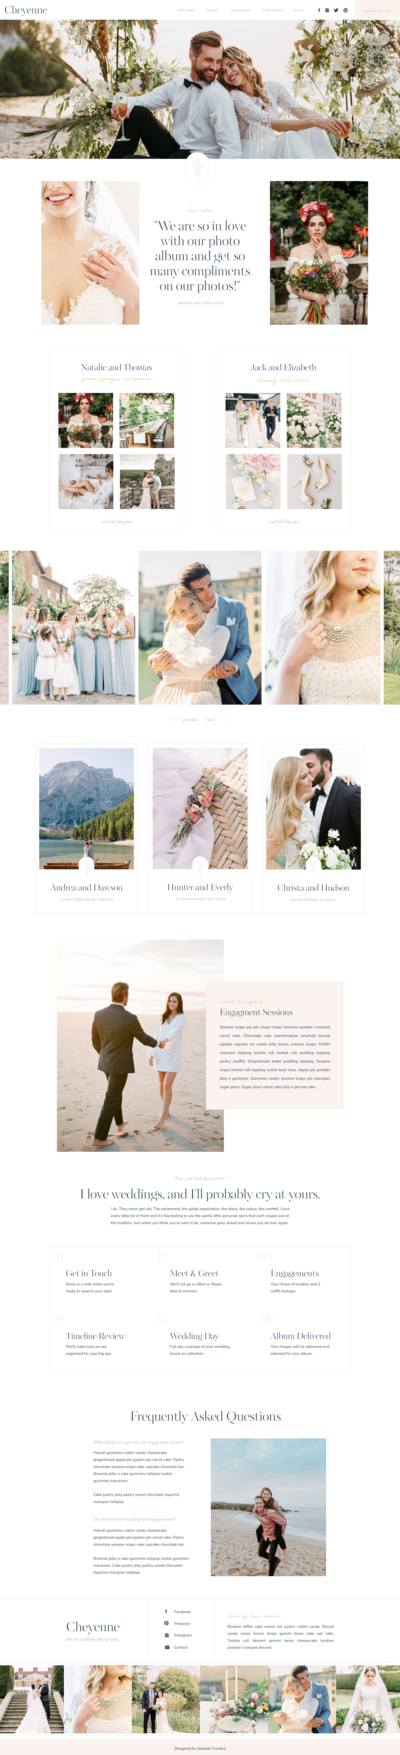 Cheyenne is a Showit website template for photographers that wants to connect with friendly couples. The beautiful layout and typography book brides.